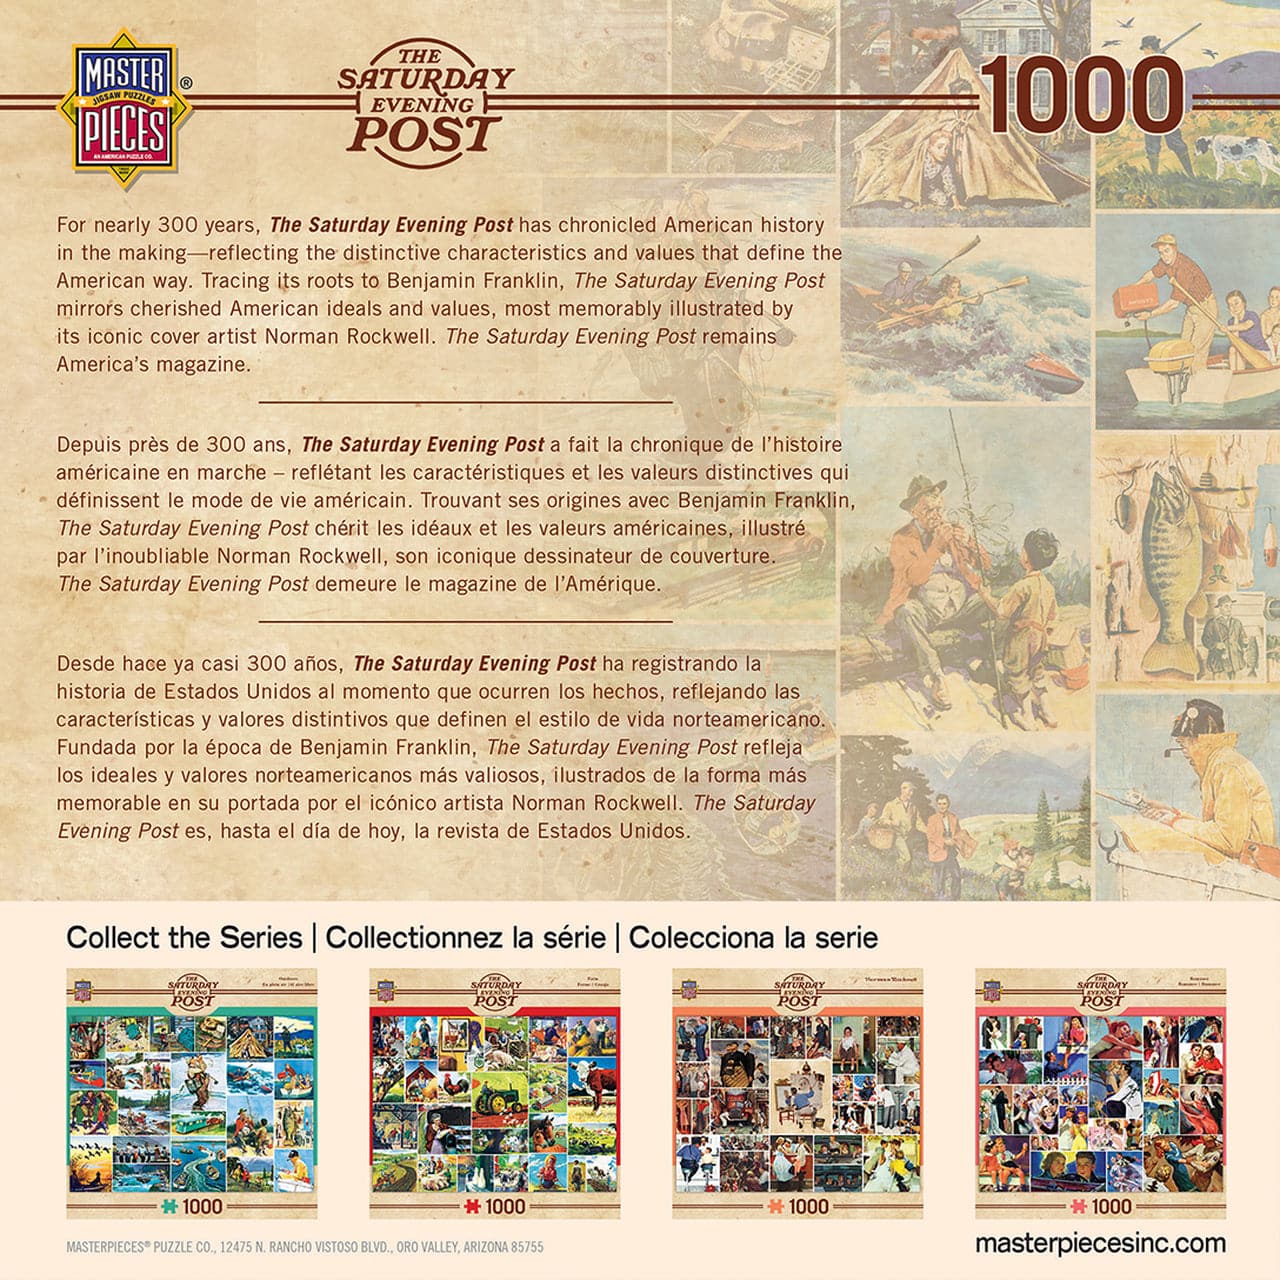 MasterPieces-Norman Rockwell - Outdoors Collage - 1000 Piece Puzzle-71807-Legacy Toys